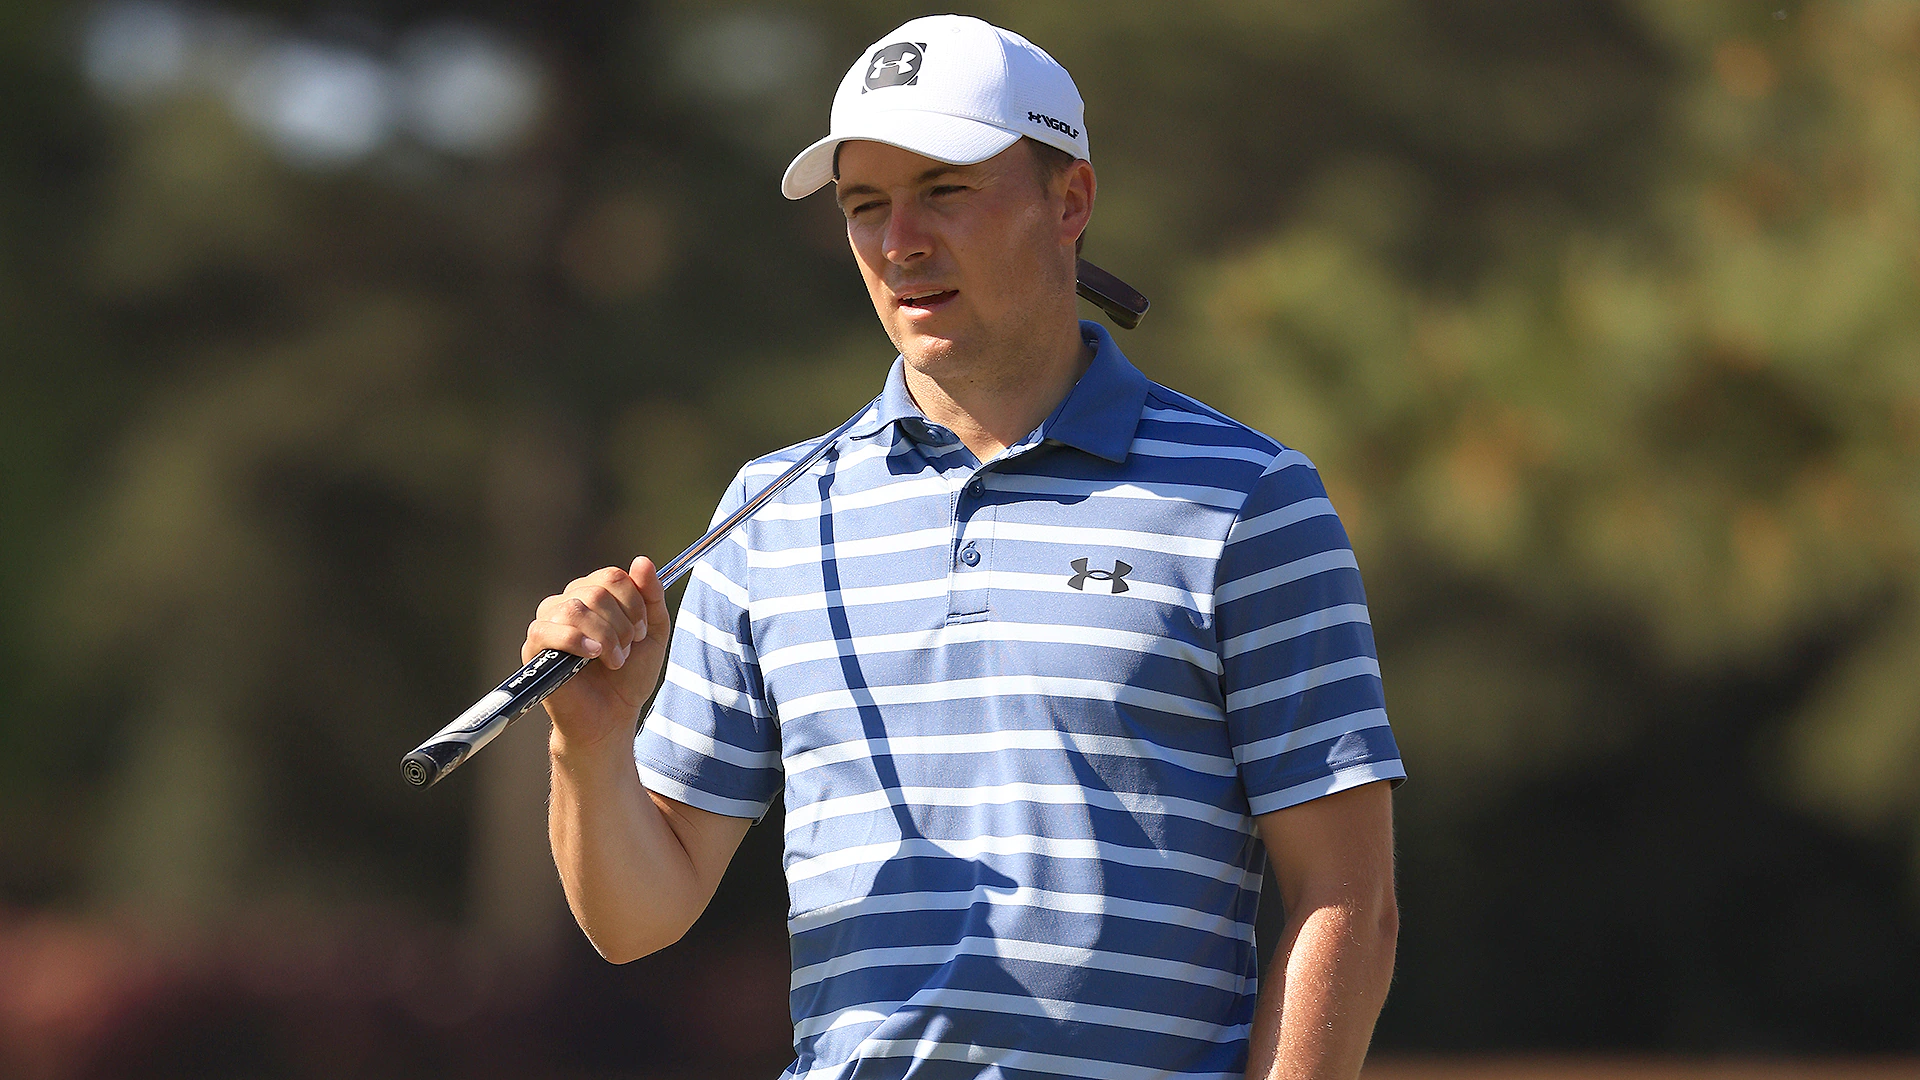 2021 Masters: Coming off first win in nearly four years, there’s still a ‘next level’ for Jordan Spieth